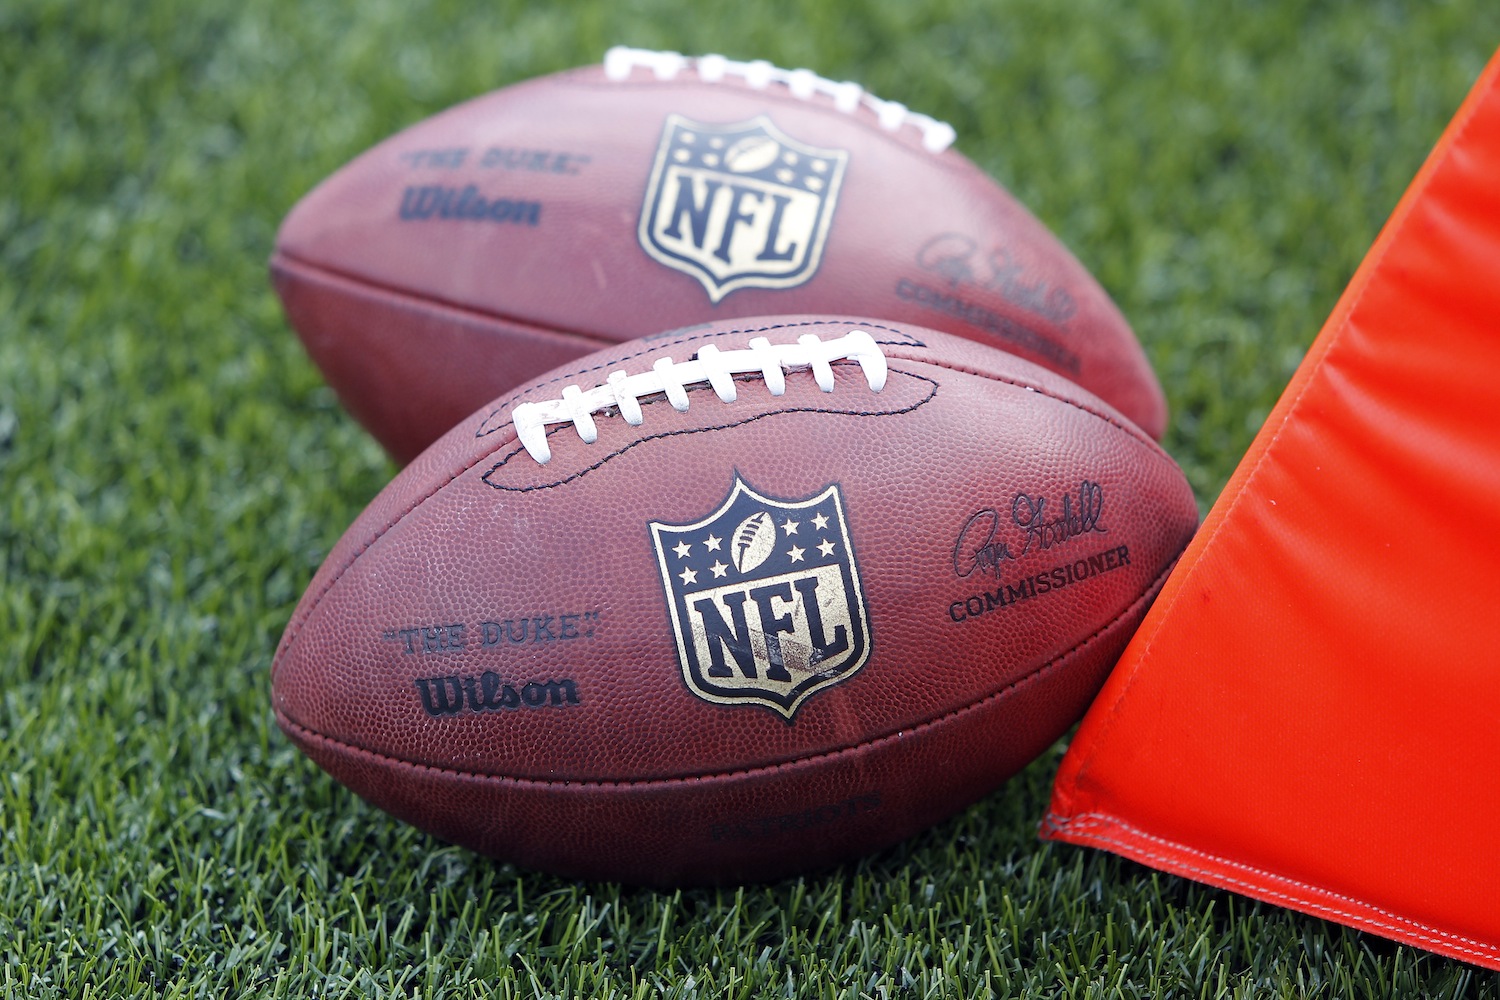 who makes the footballs for the nfl